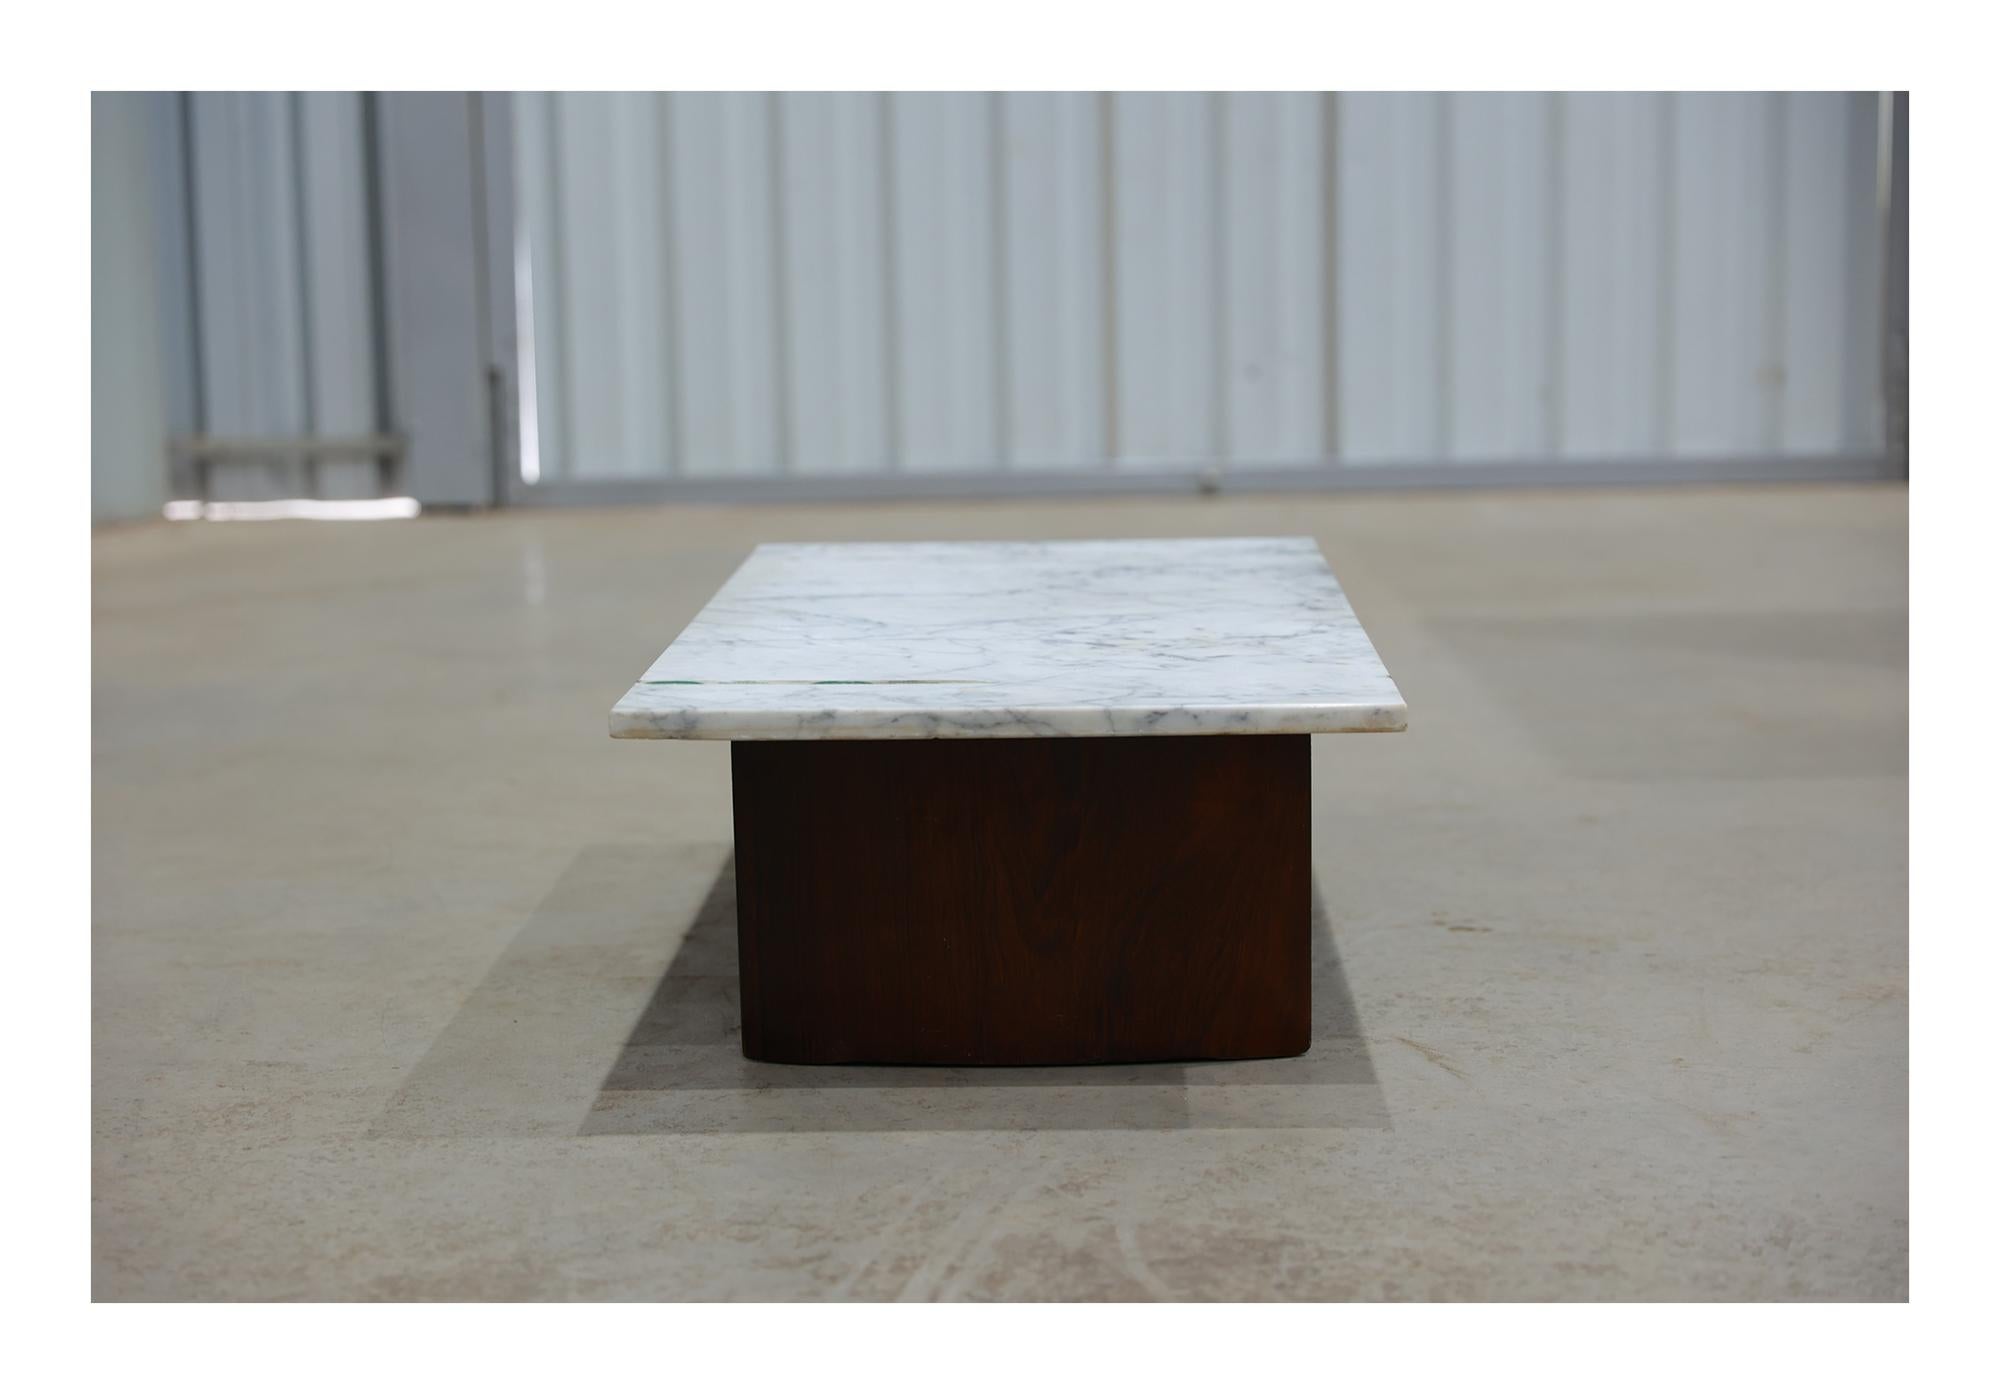 Hand-Carved Brazilian Modern Coffee Table in Hardwood and Marble, Joaquim Tenreiro, 1950s For Sale